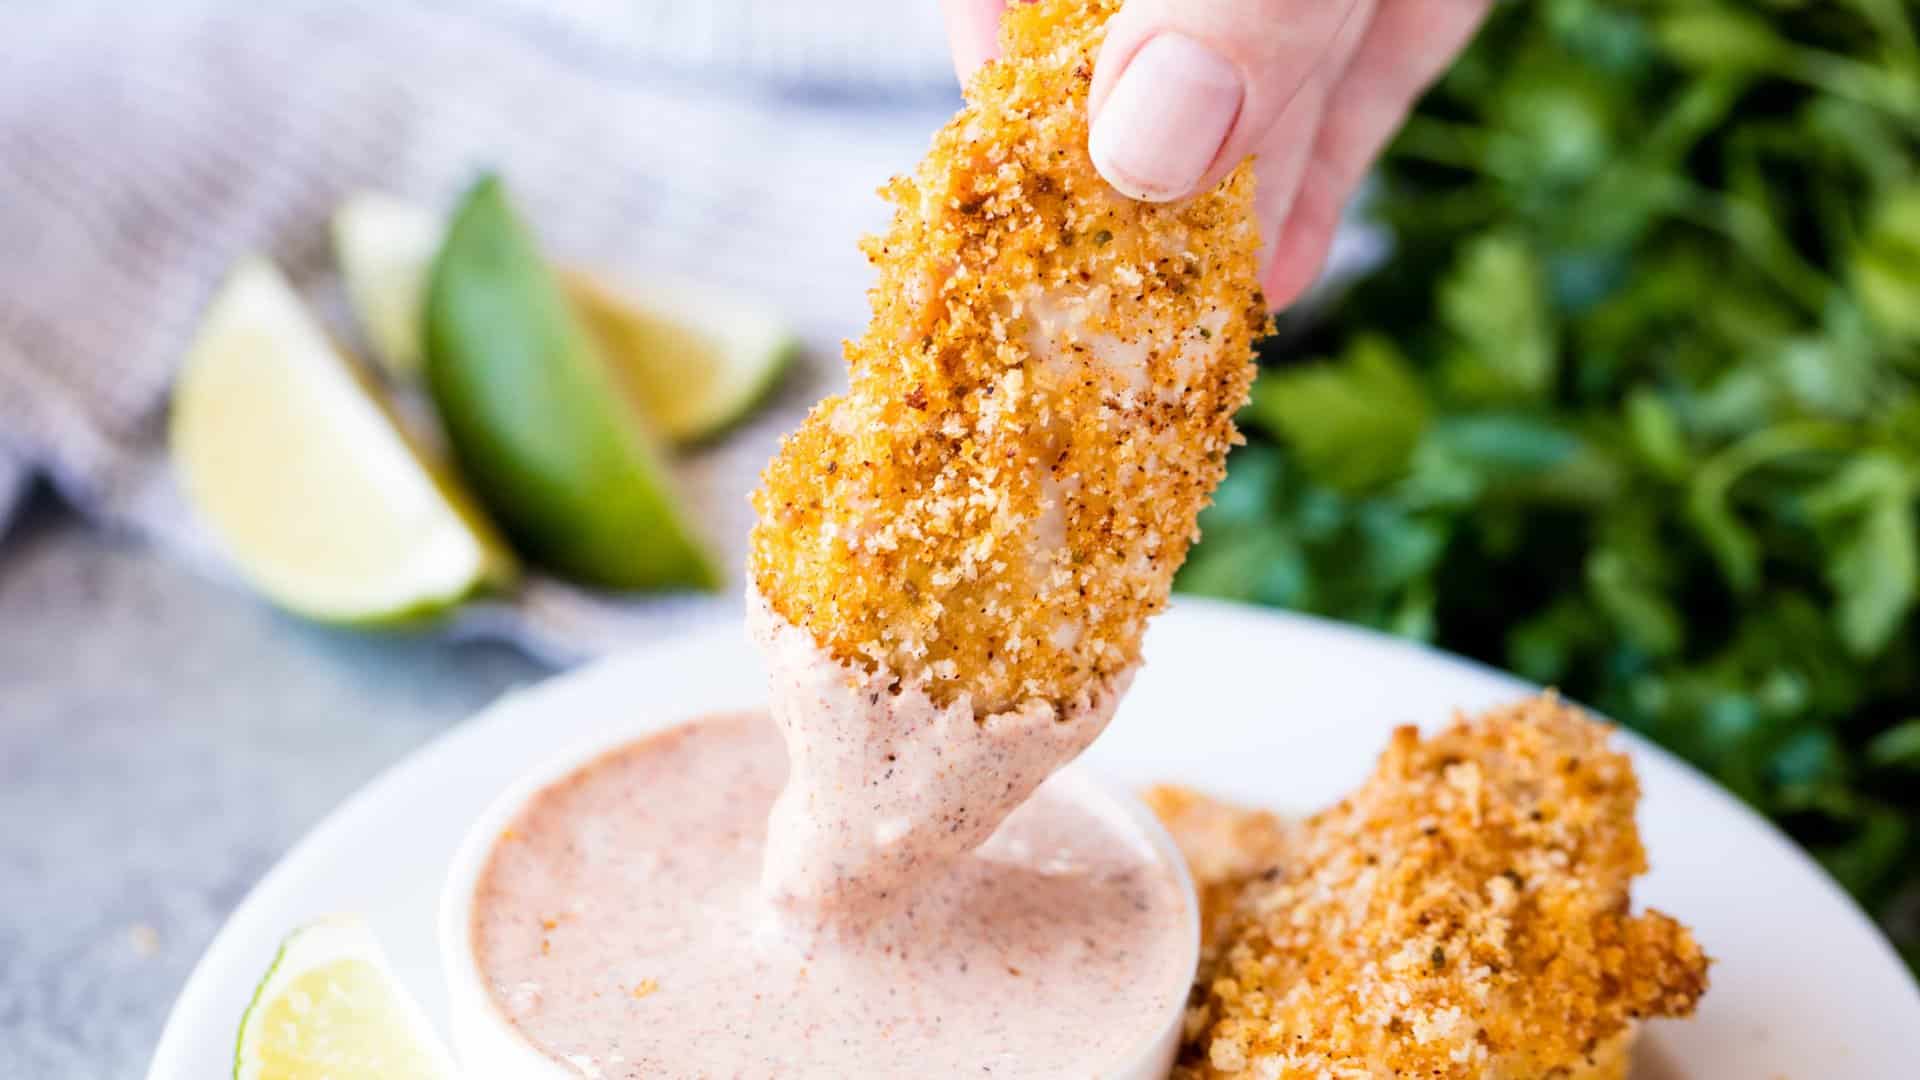 Chili-Lime Baked Chicken Tenders take the classic flavor combination and mashes it with a kid favorite, for a grown up version of chicken tenders that will have you licking your fingers! This easy dinner will be a hit with the whole family!